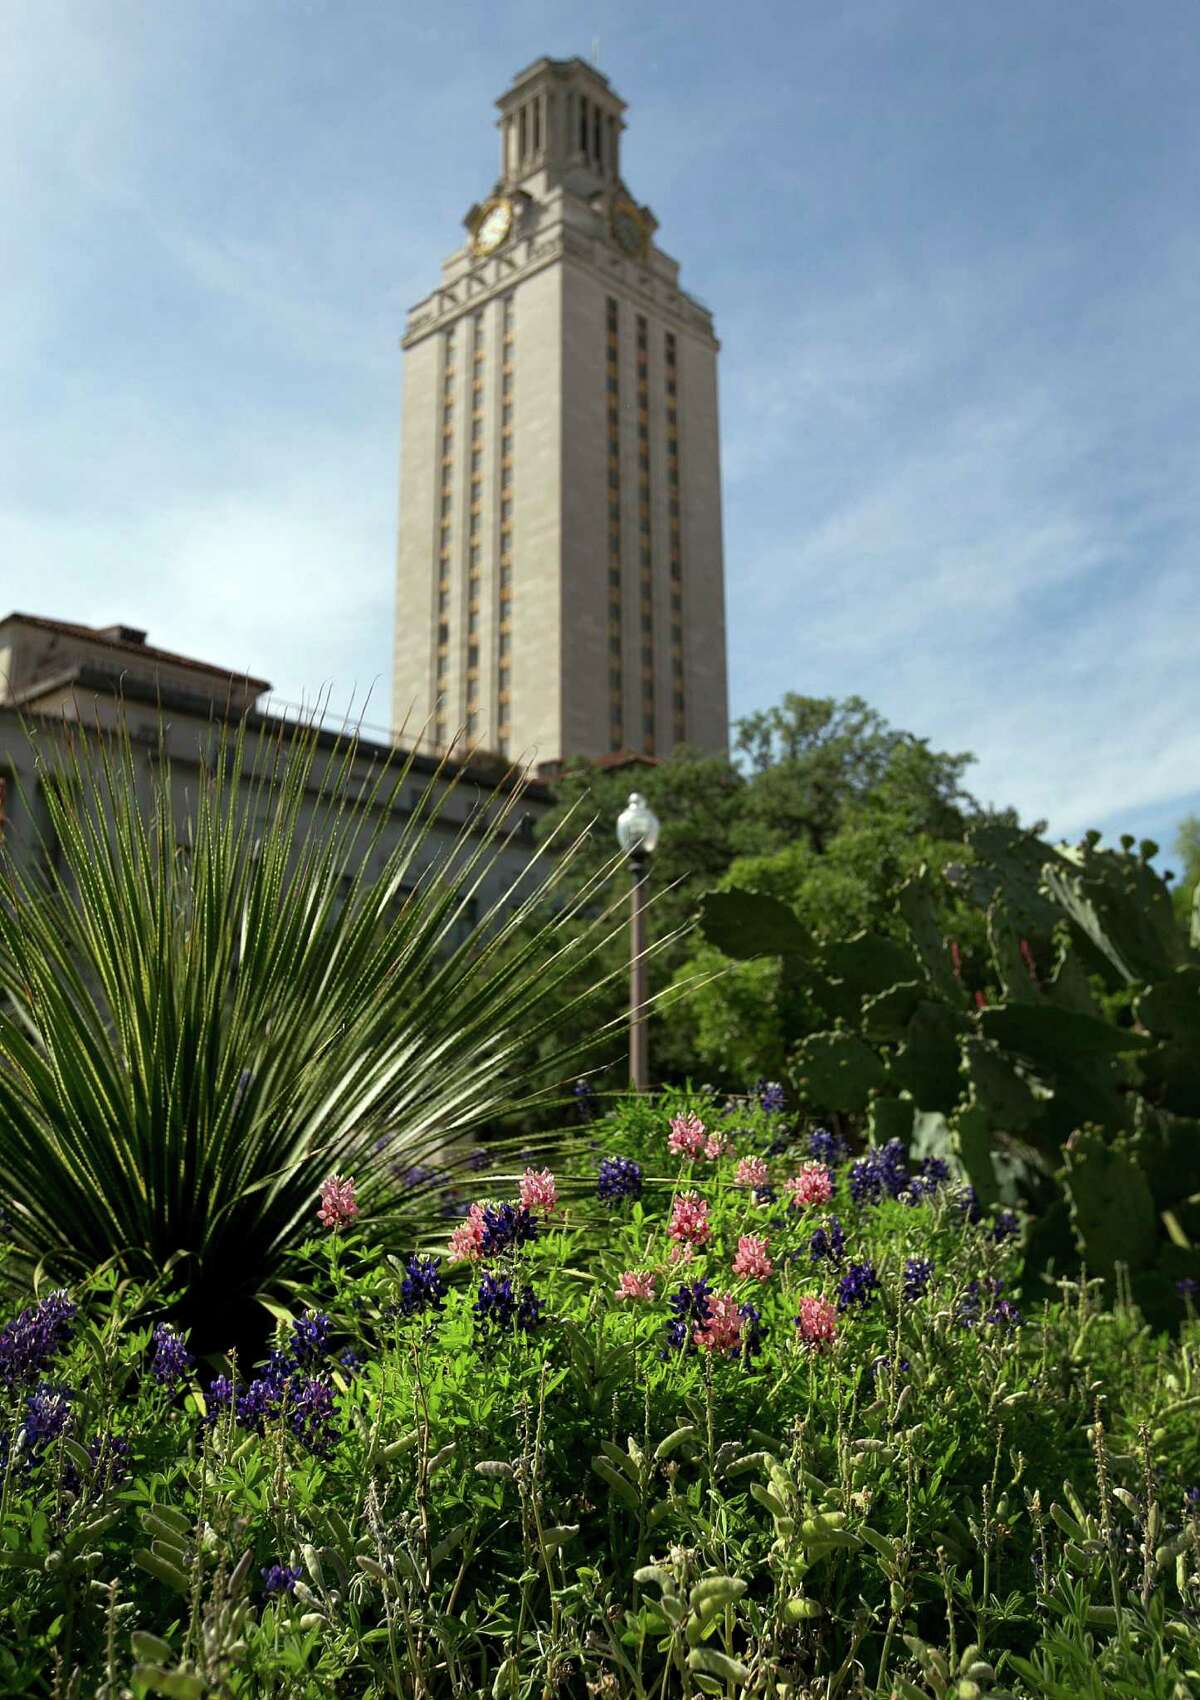 Speculation is growing about some Aggie-maroon bluebonnets blooming near the University of Texas Tower.